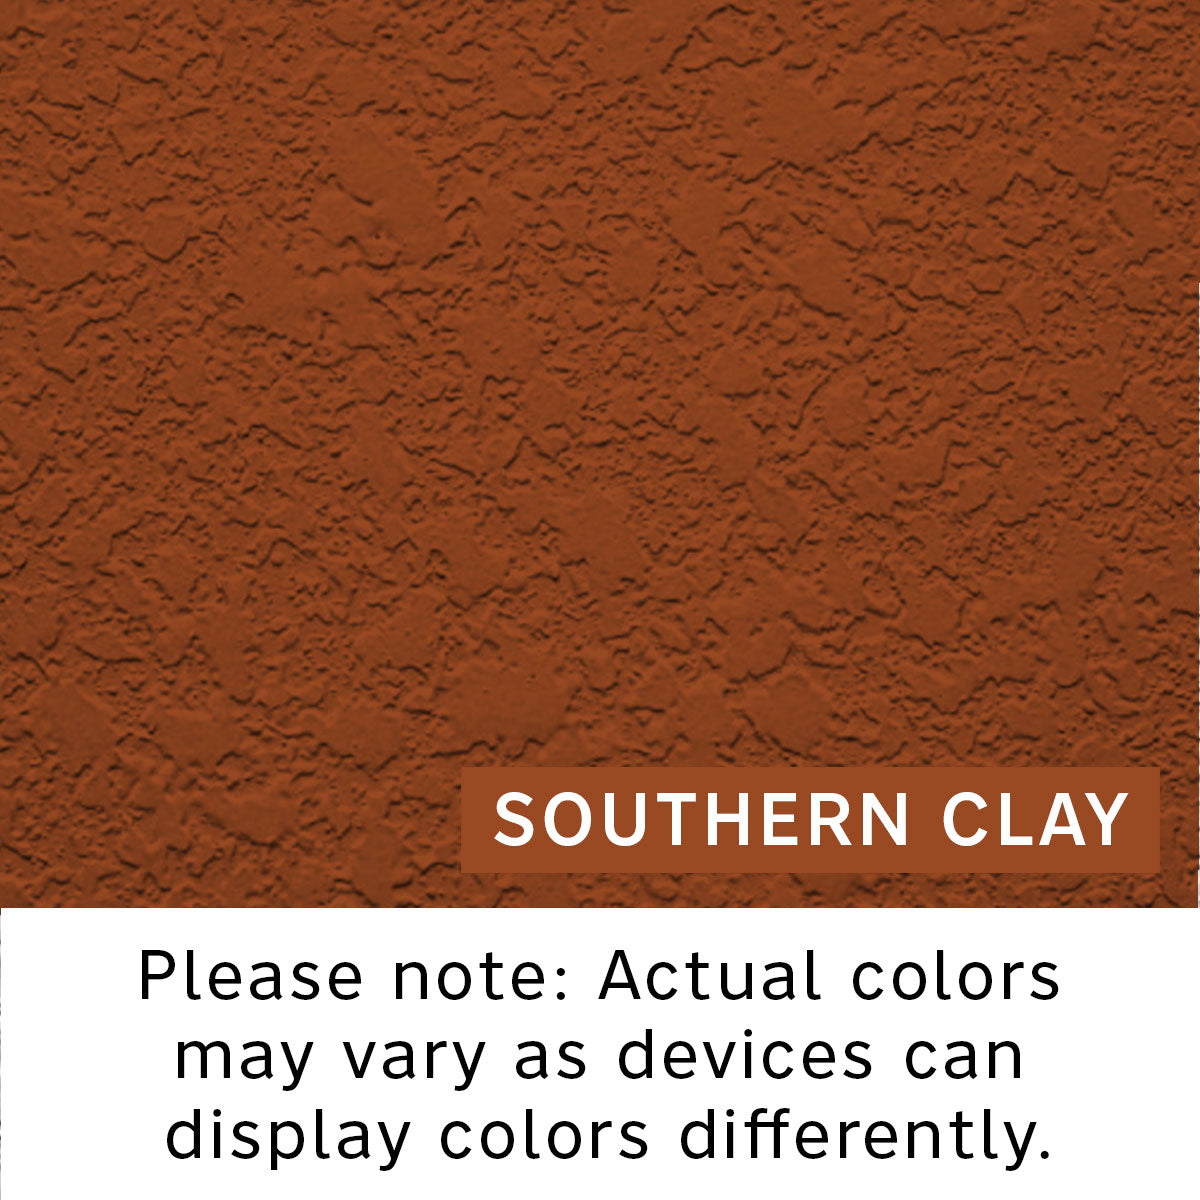 Textured color swatch for Southern Clay